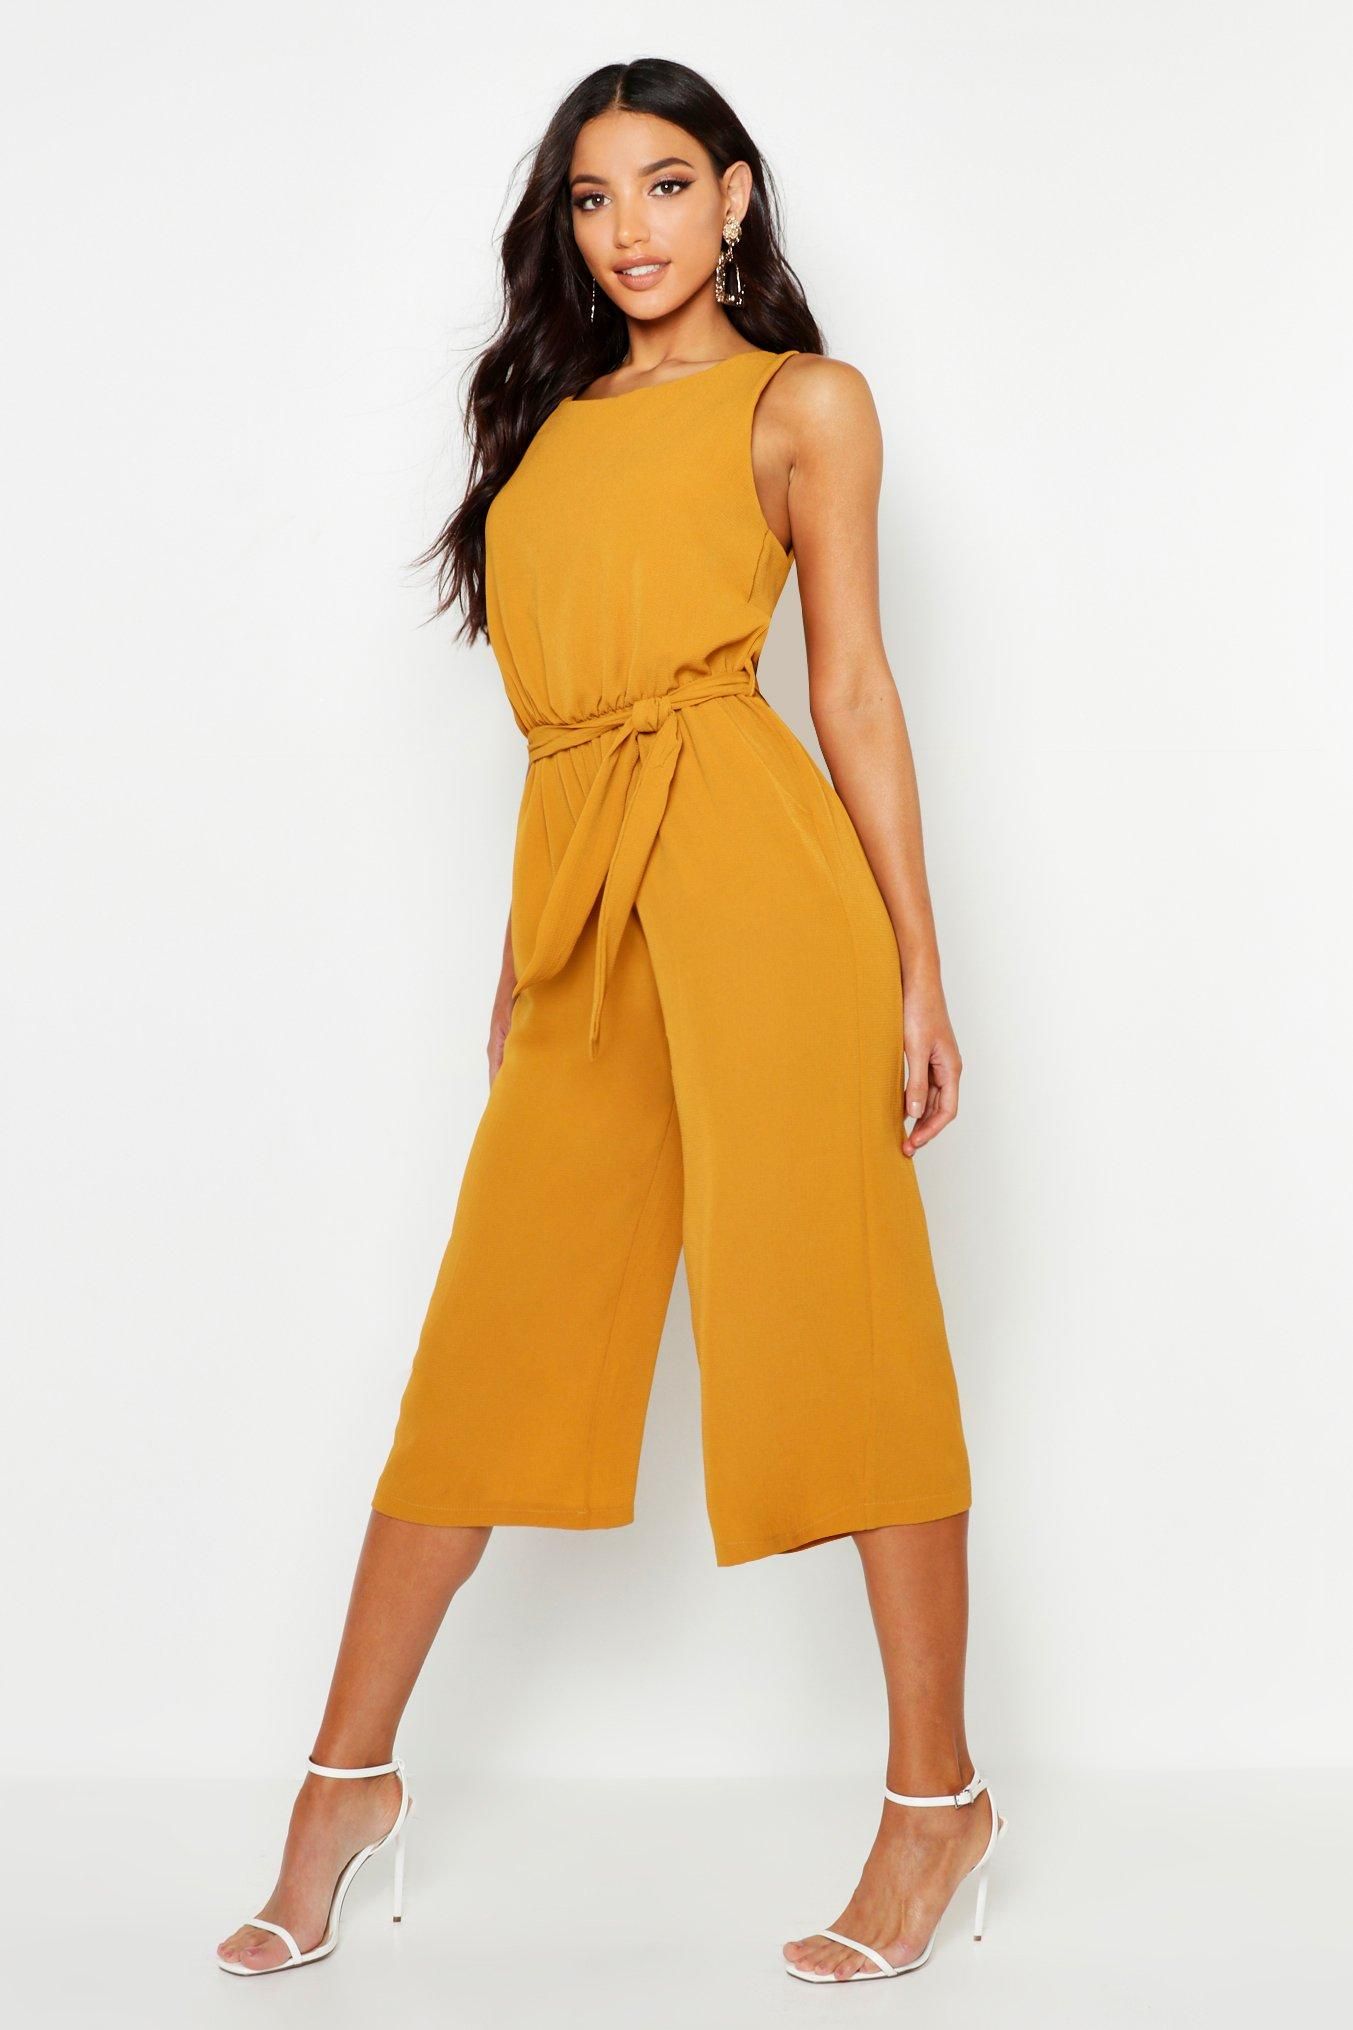 Effortless Chic: Embrace Comfort with Culotte Jumpsuits